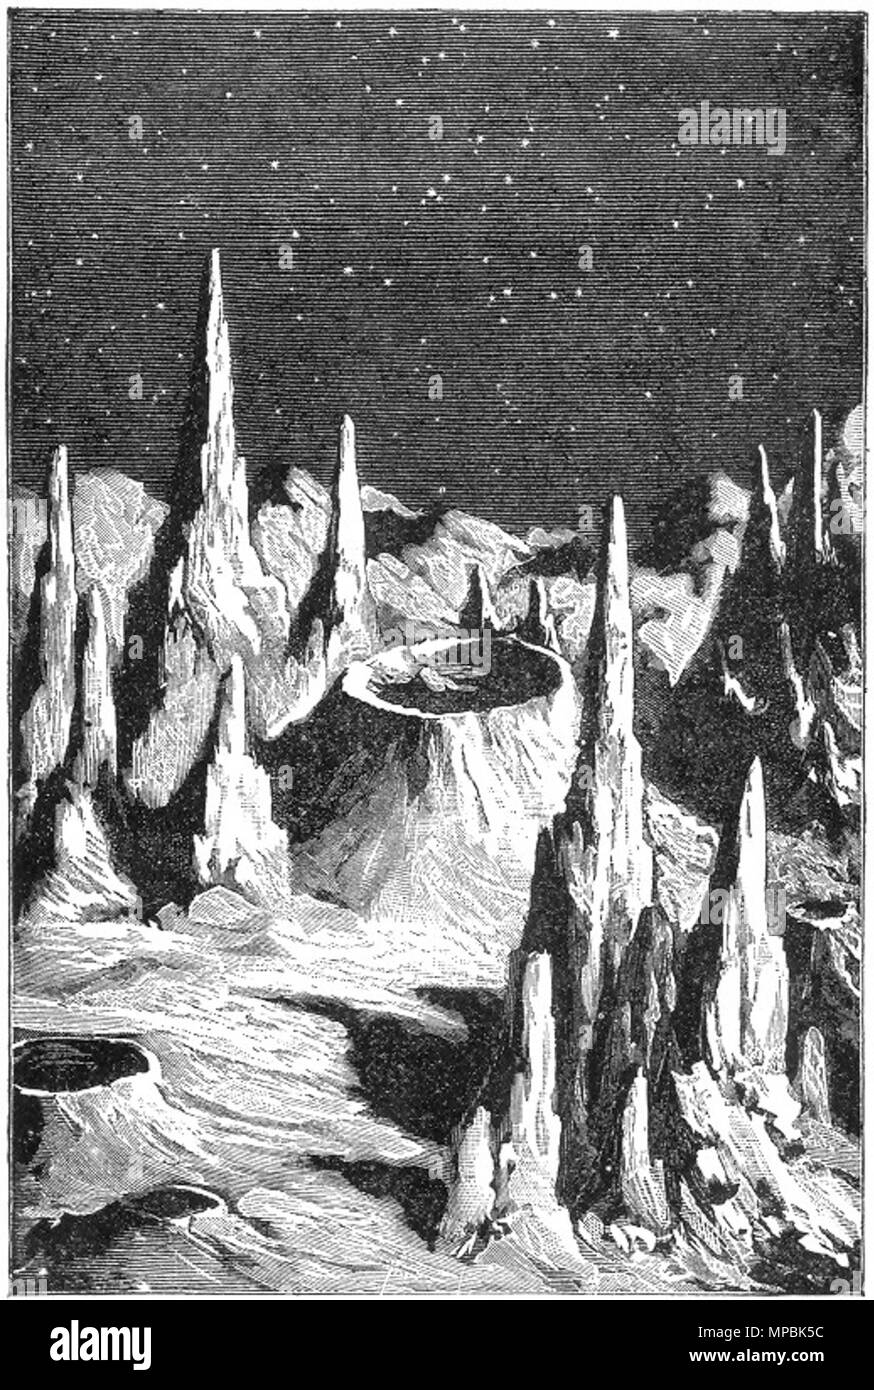 . English: The figure was named 'Lunar Day', and it represents a historical concept of the lunar surface appearance. Robotic missions to the Moon later demonstrated that the surface features are much more rounded due to a long history of impacts. 1879. This file is lacking author information. 940 Old view moon Stock Photo